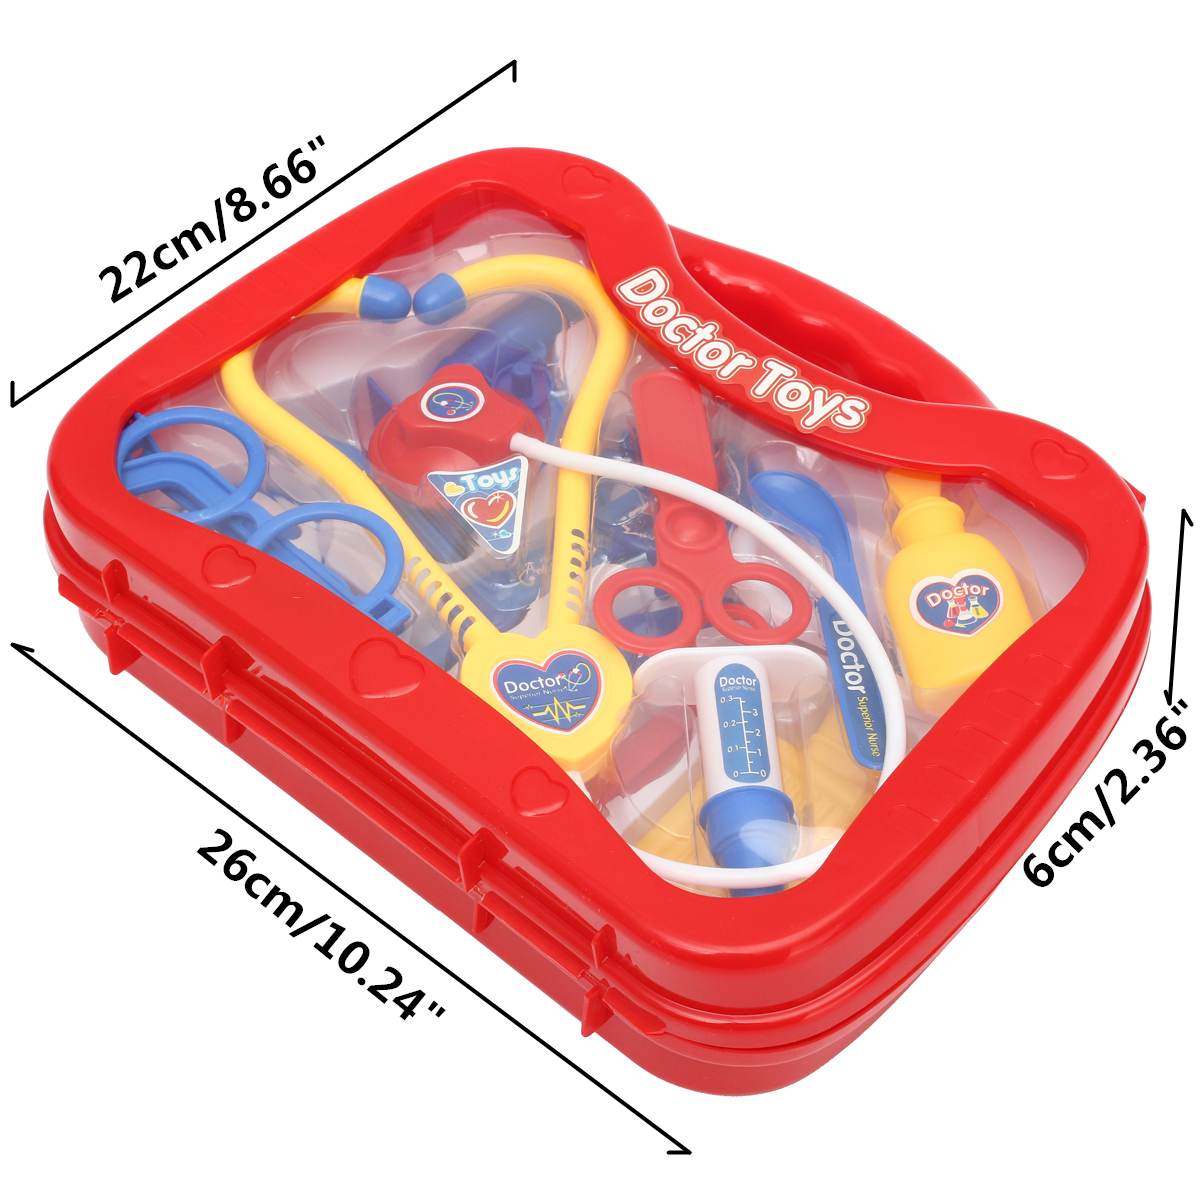 Kids Childrens Role Play Doctor Nurses Toy Medical Set Kit Gift Toys 37